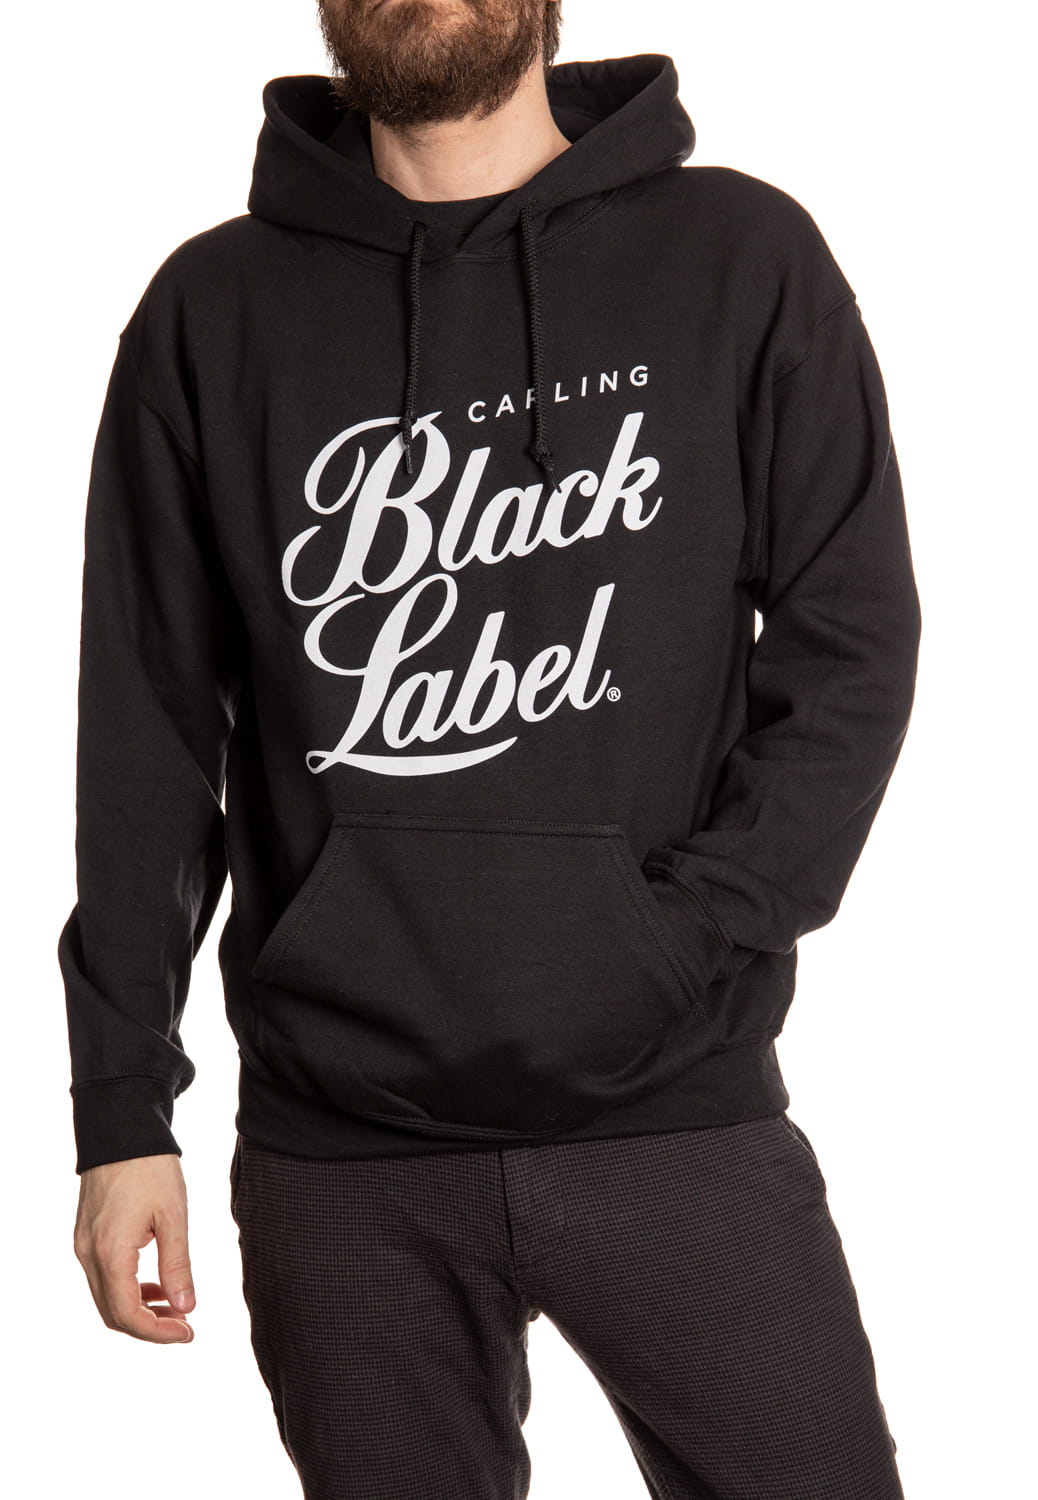 Carling Black Label Hoodie Front View. Black Sweater With White Print.